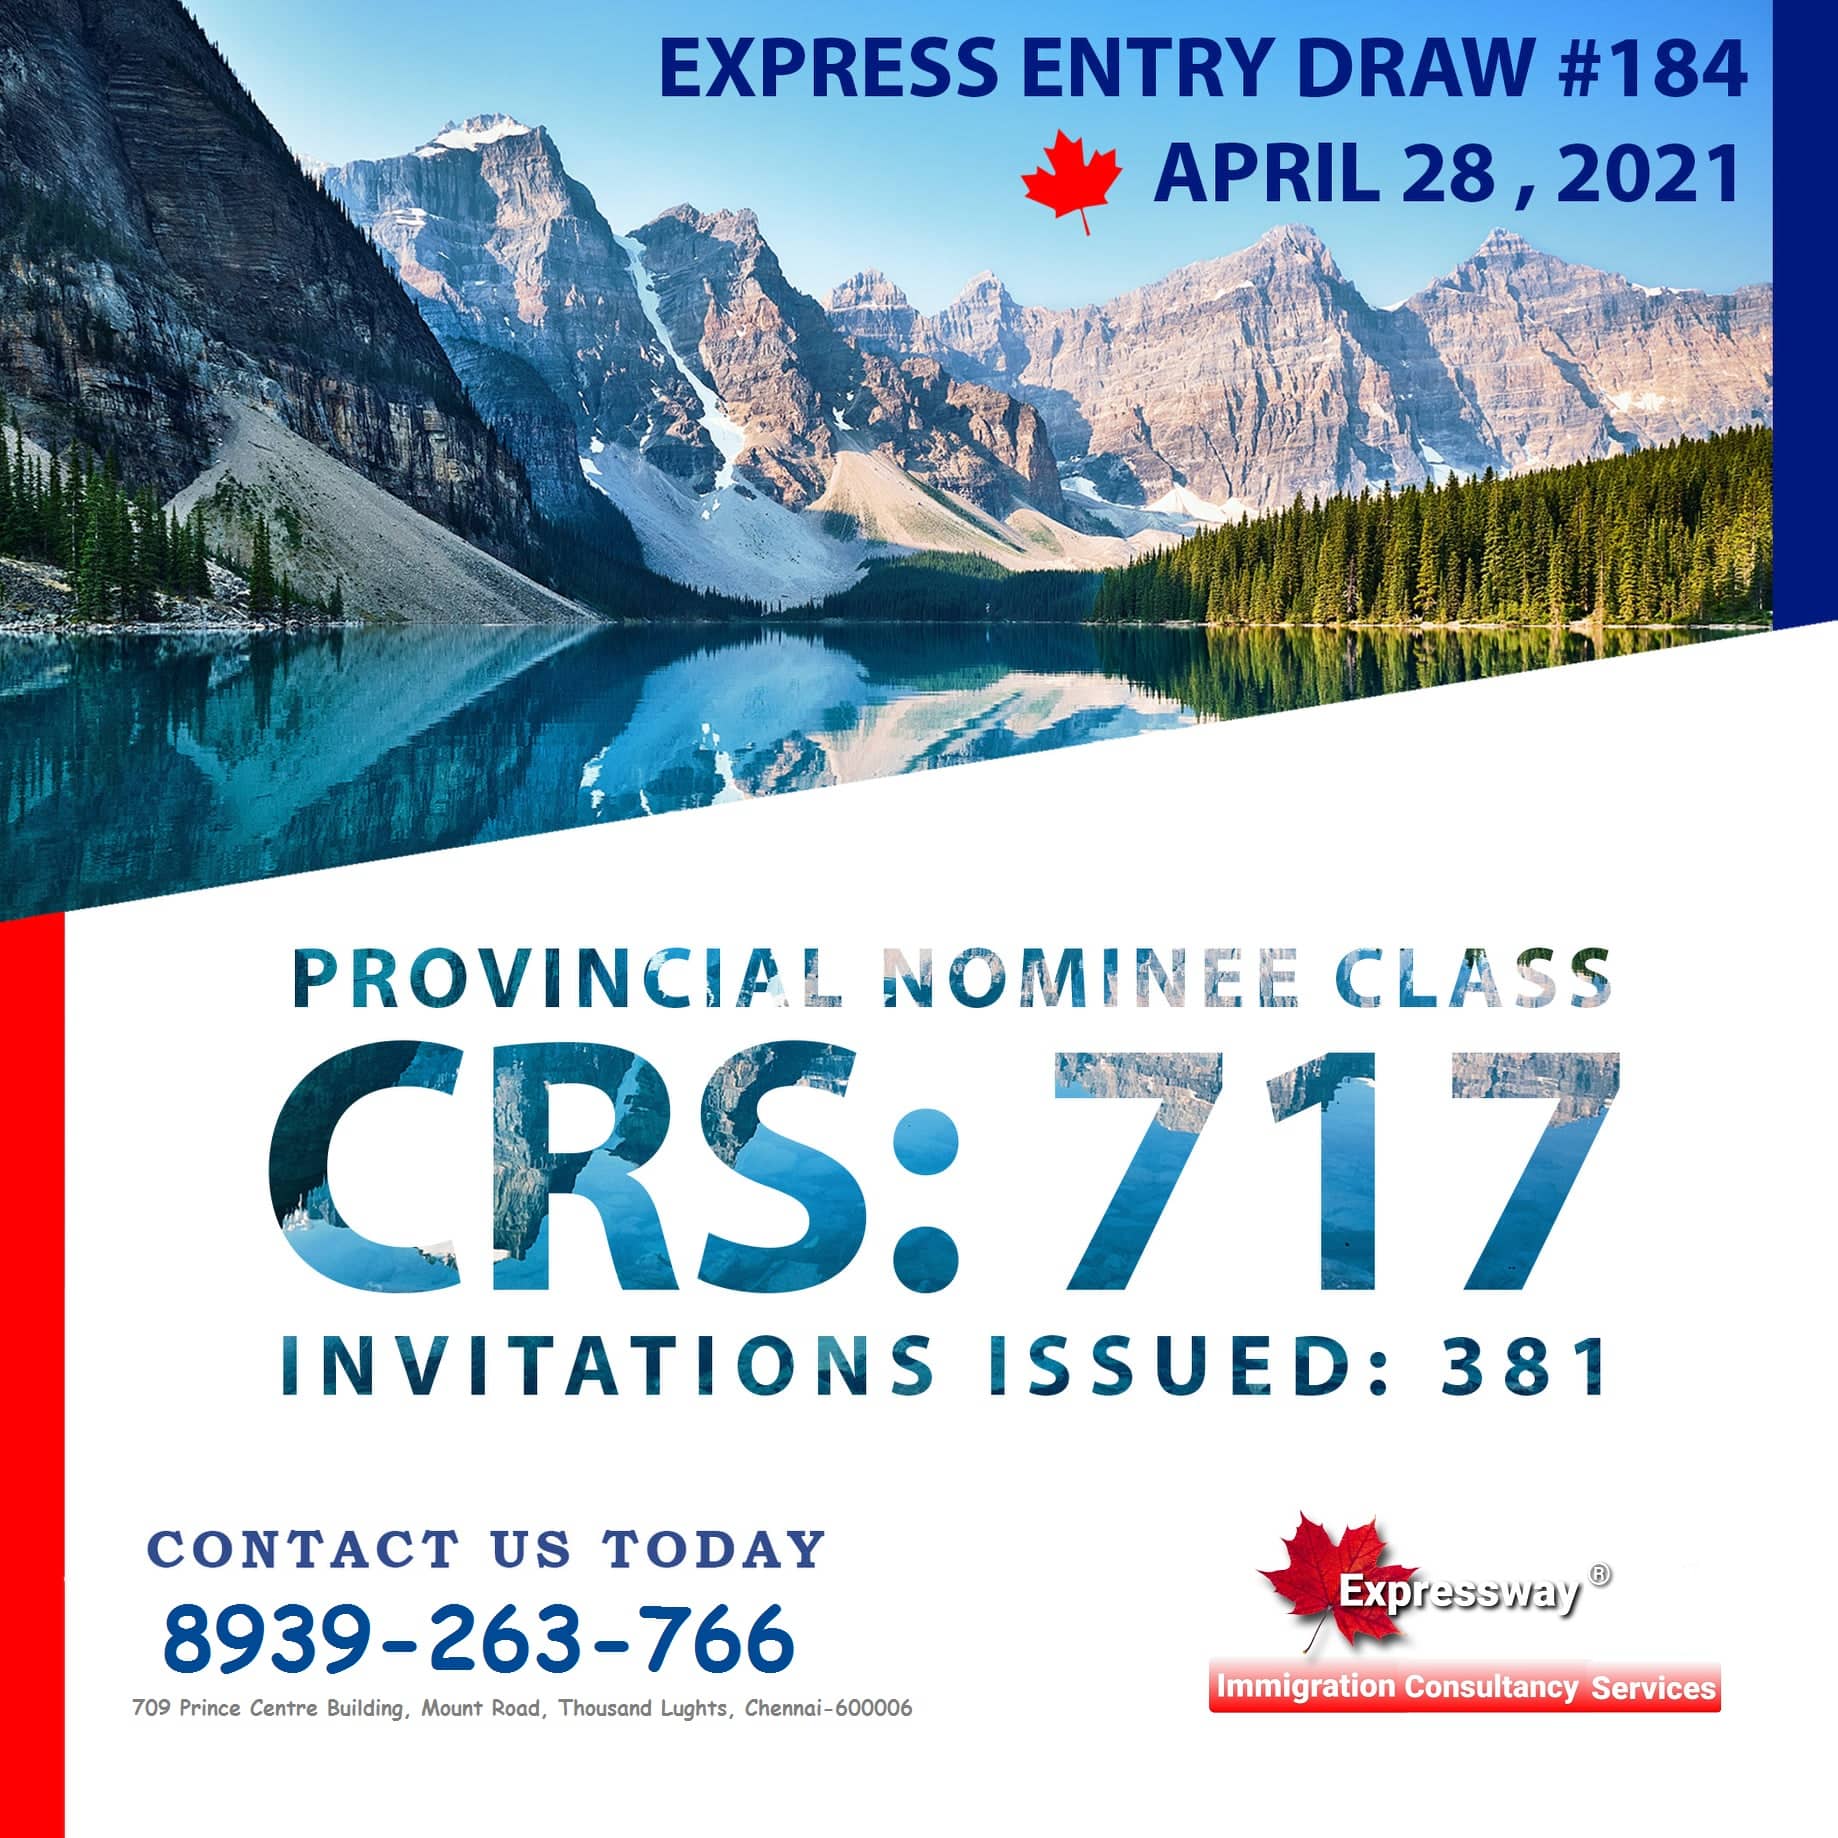 express entry draw #184